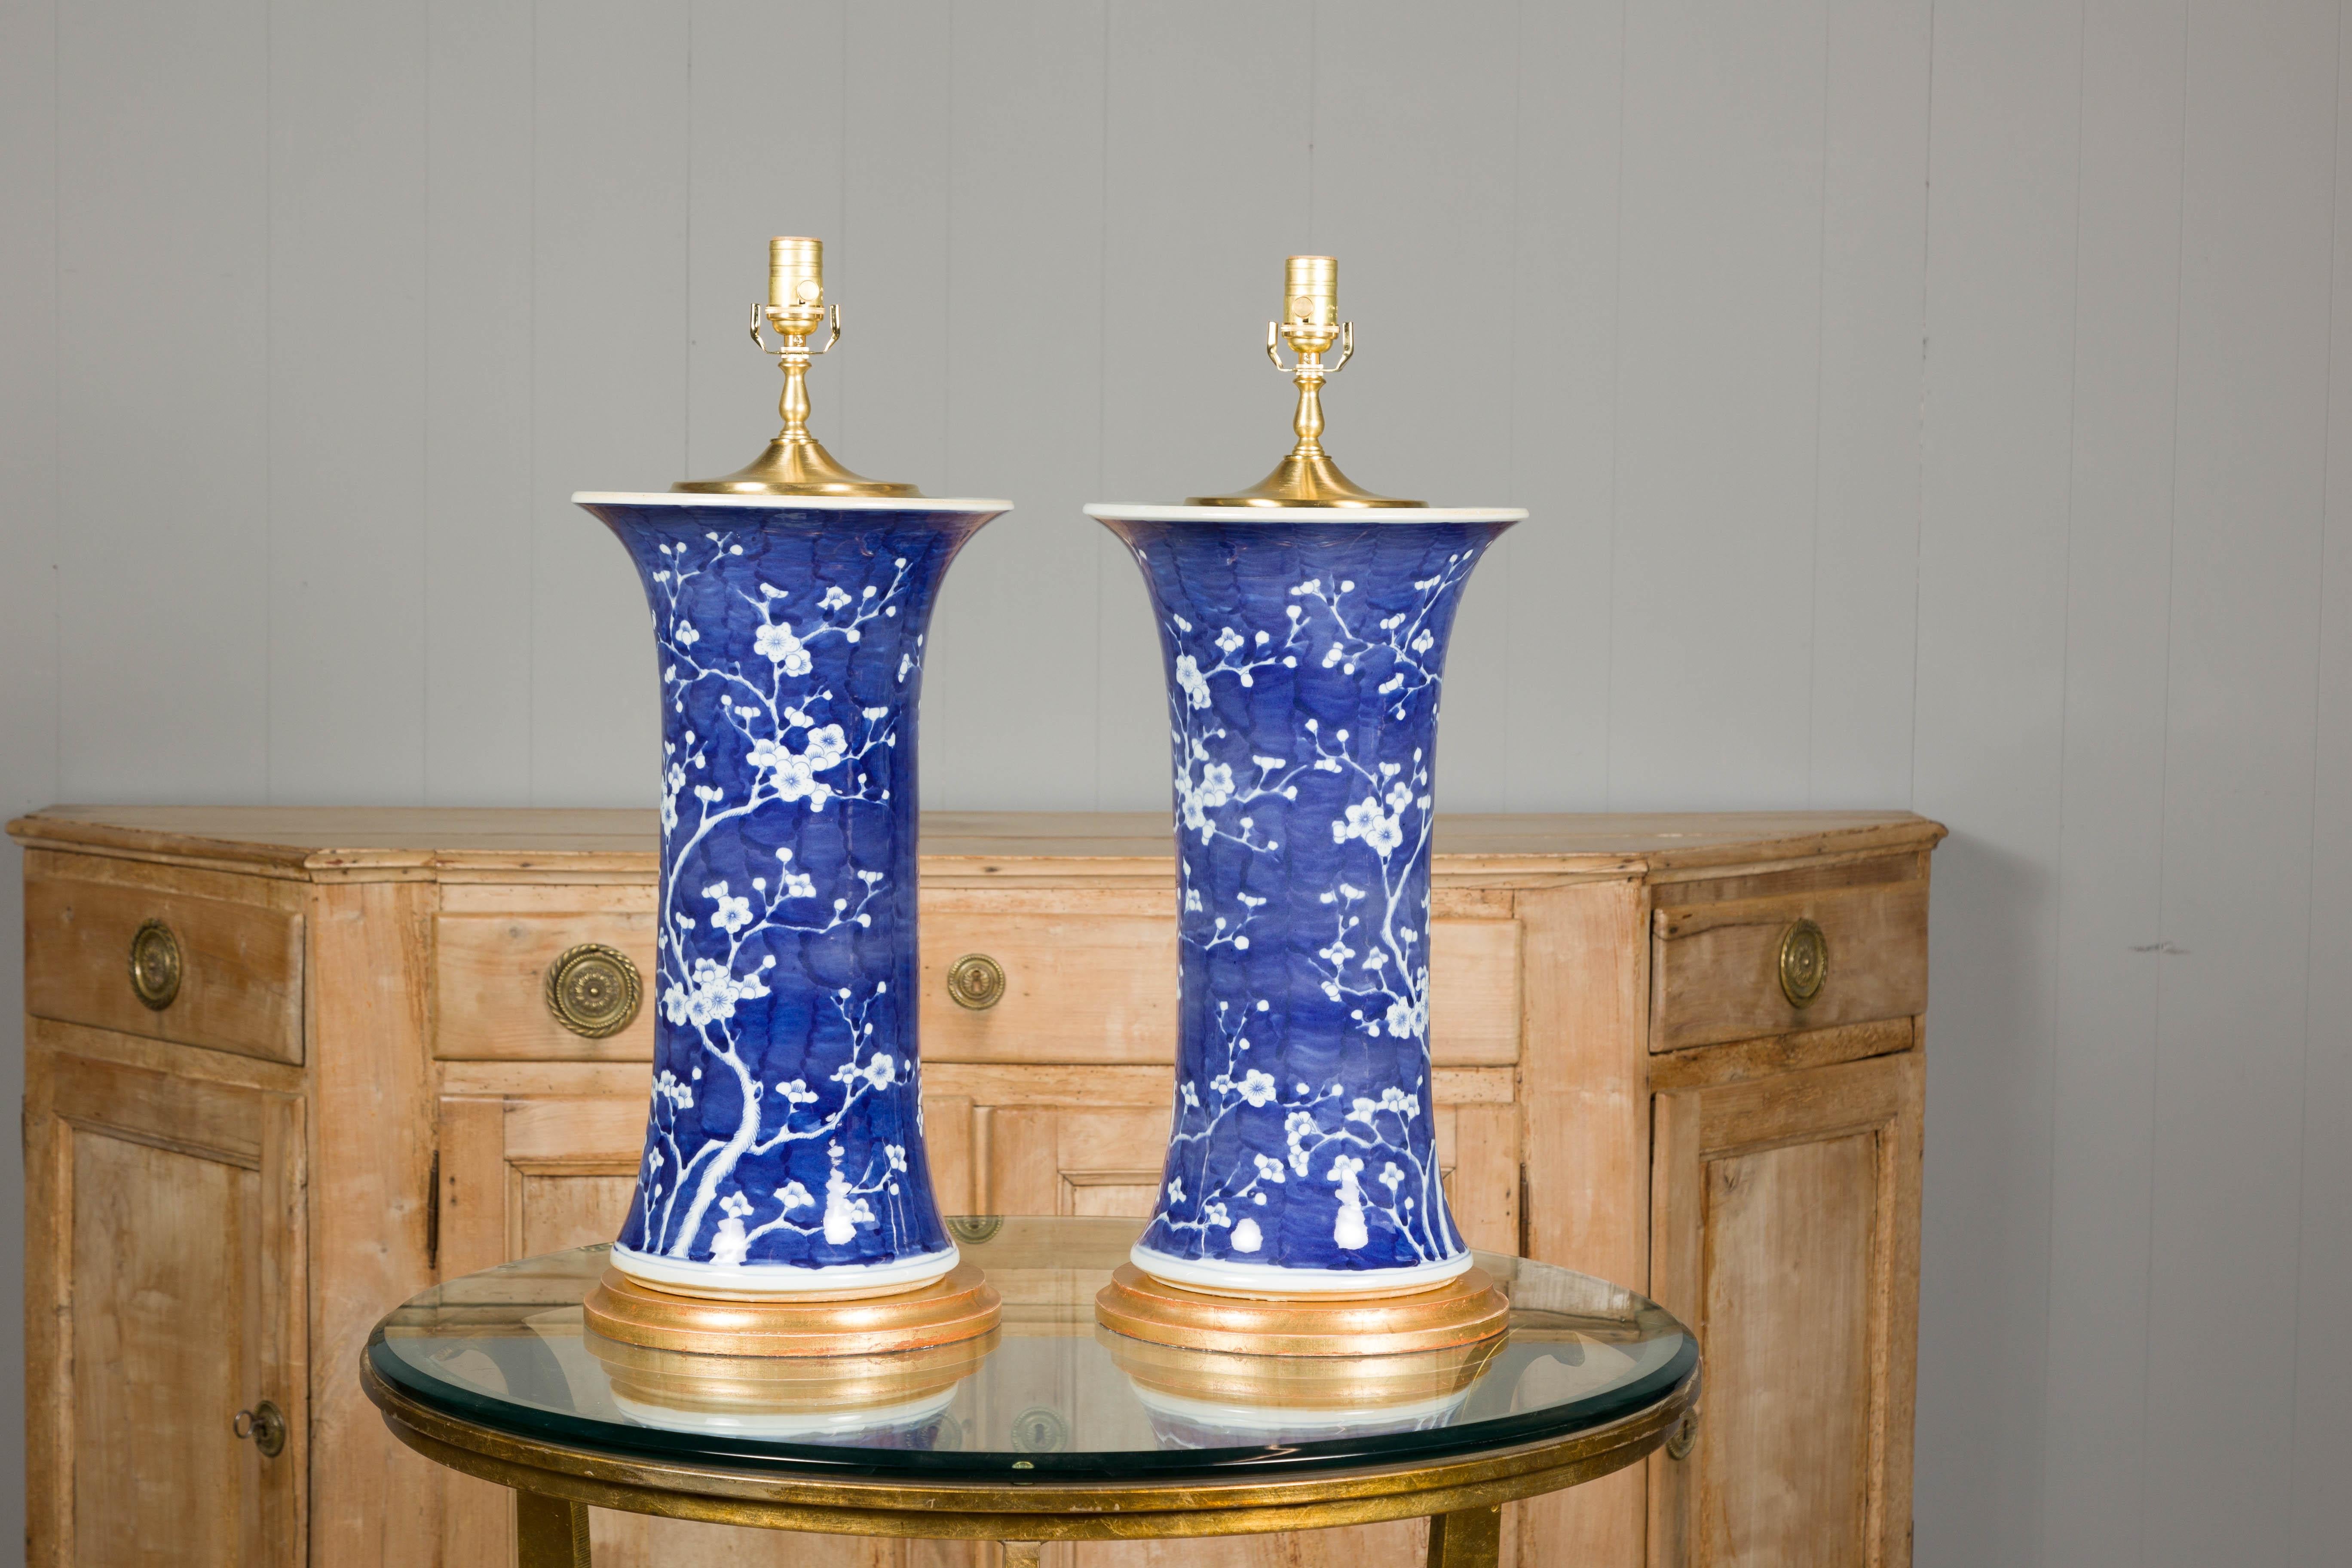 A pair of Midcentury Asian blue and white porcelain table lamps with floral décor on gilded bases, rewired for the USA. This pair of Midcentury Asian porcelain table lamps is a sublime blend of classic charm and modern functionality, designed to